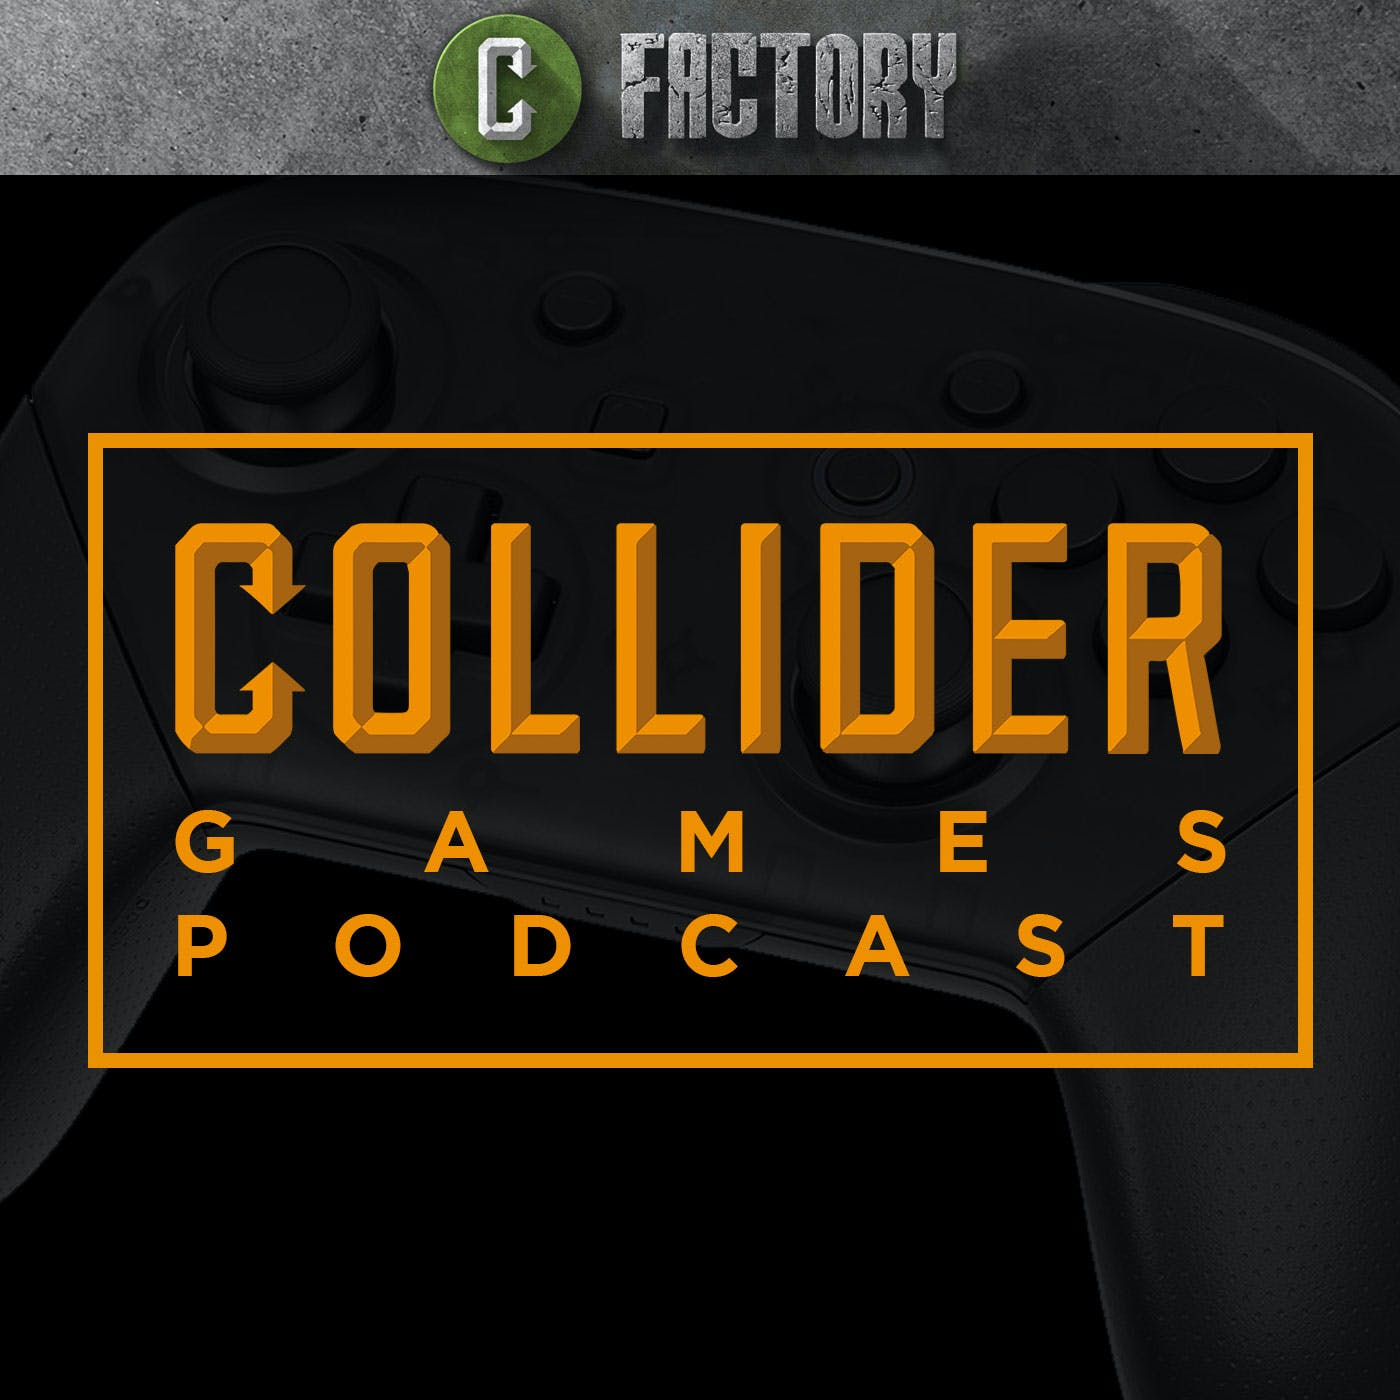 Will the Last of Us TV Series Be Better Than Doing a Movie? - Collider Games Podcast